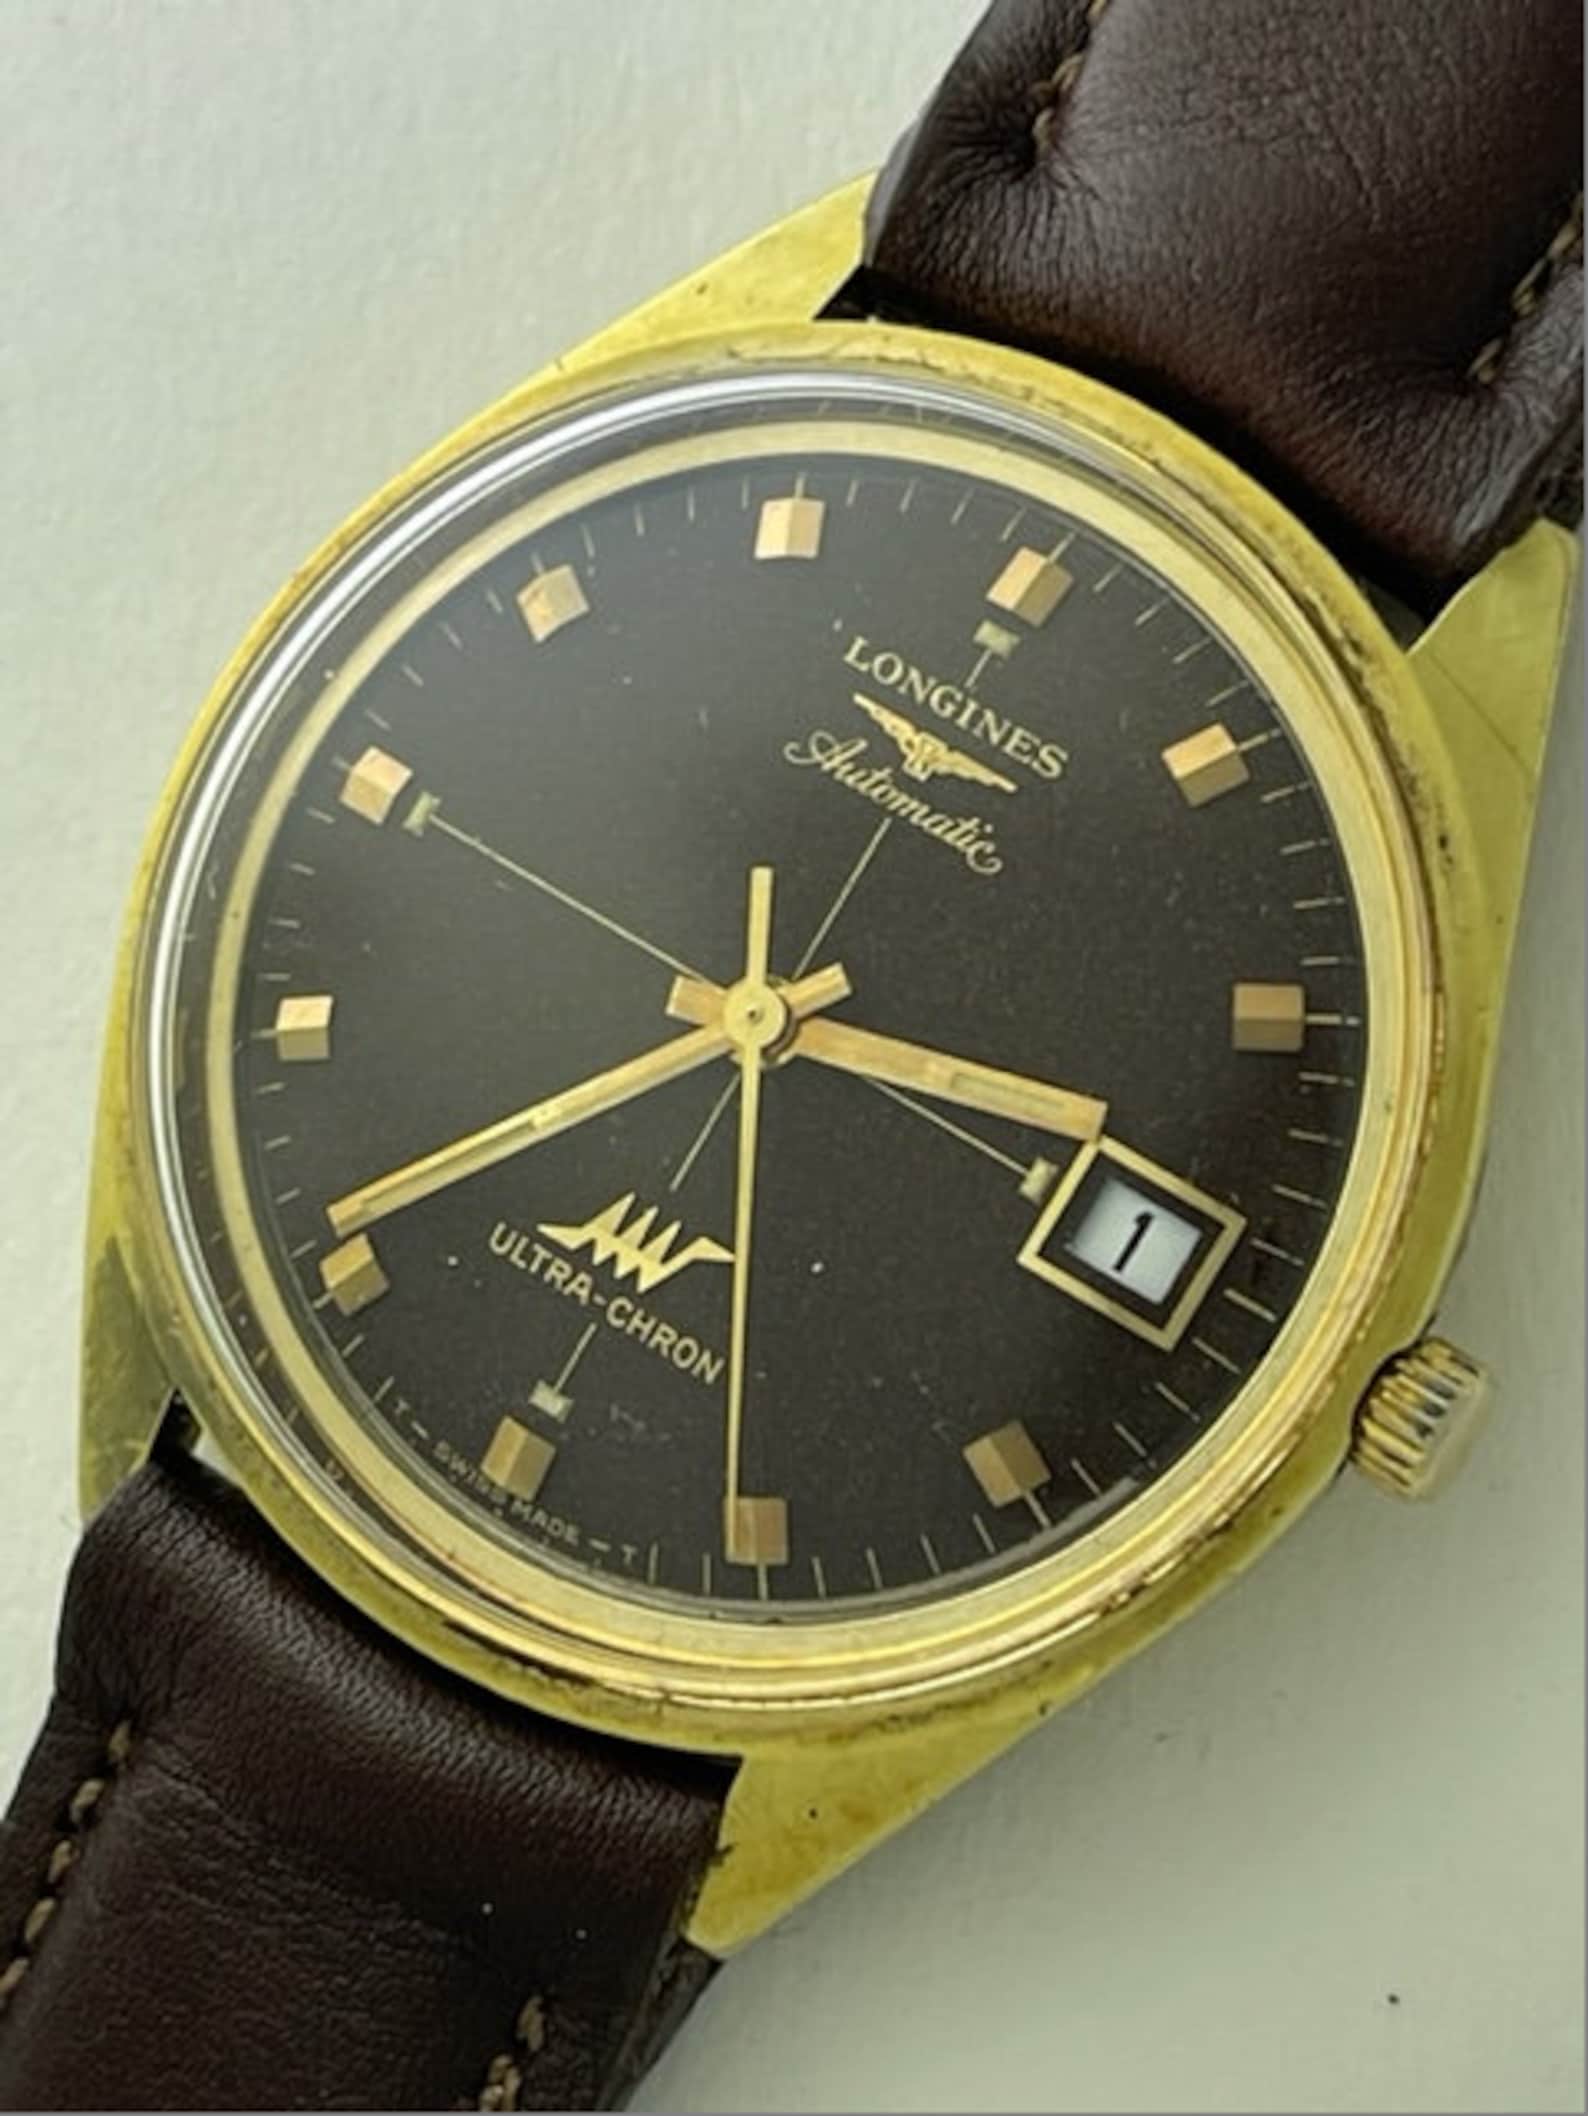 Longines ULTRA-CHRON Automatic Gold Capped Ref.8302-6 Cal.431 Adjusted ...